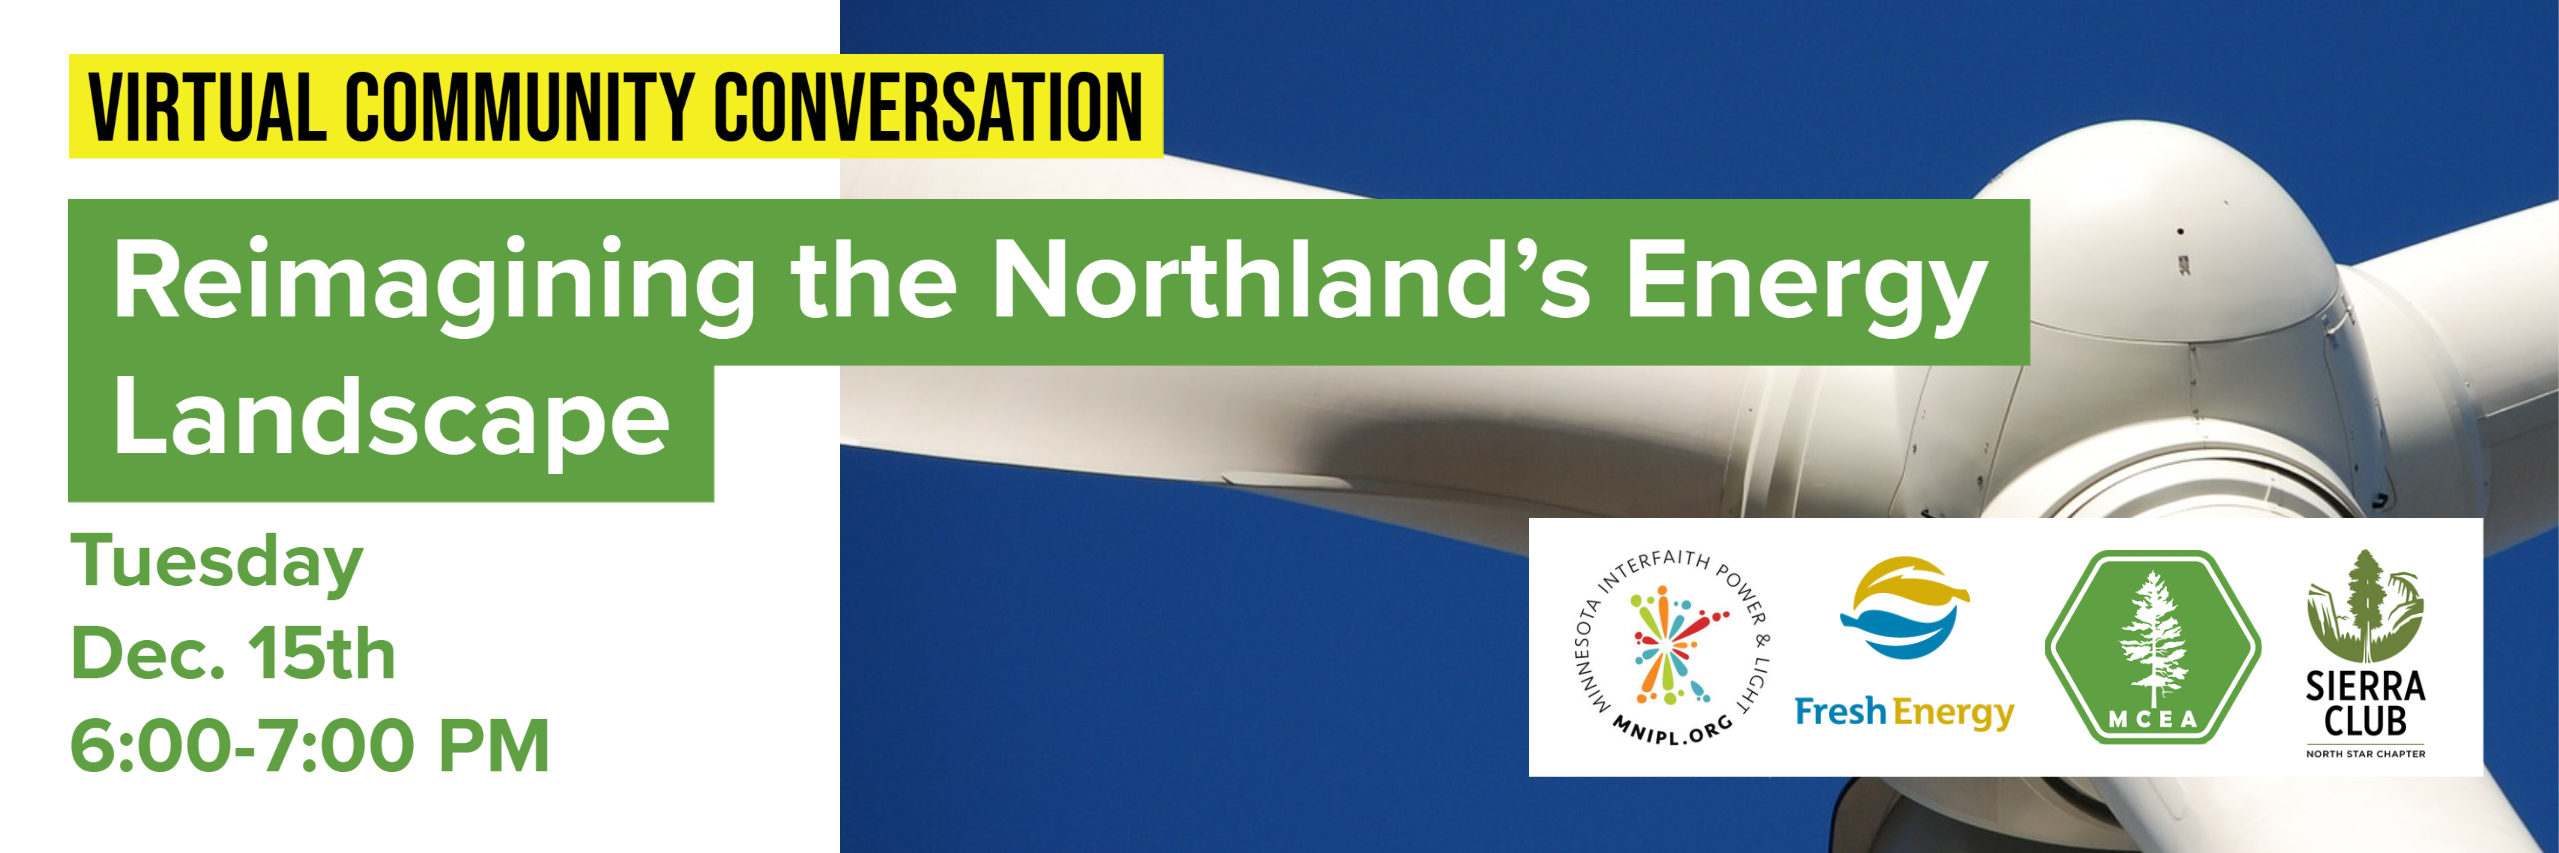 virtual community conversation - reimagining the Northland's energy landscape Tuesday December 15th 6 - 7 pm